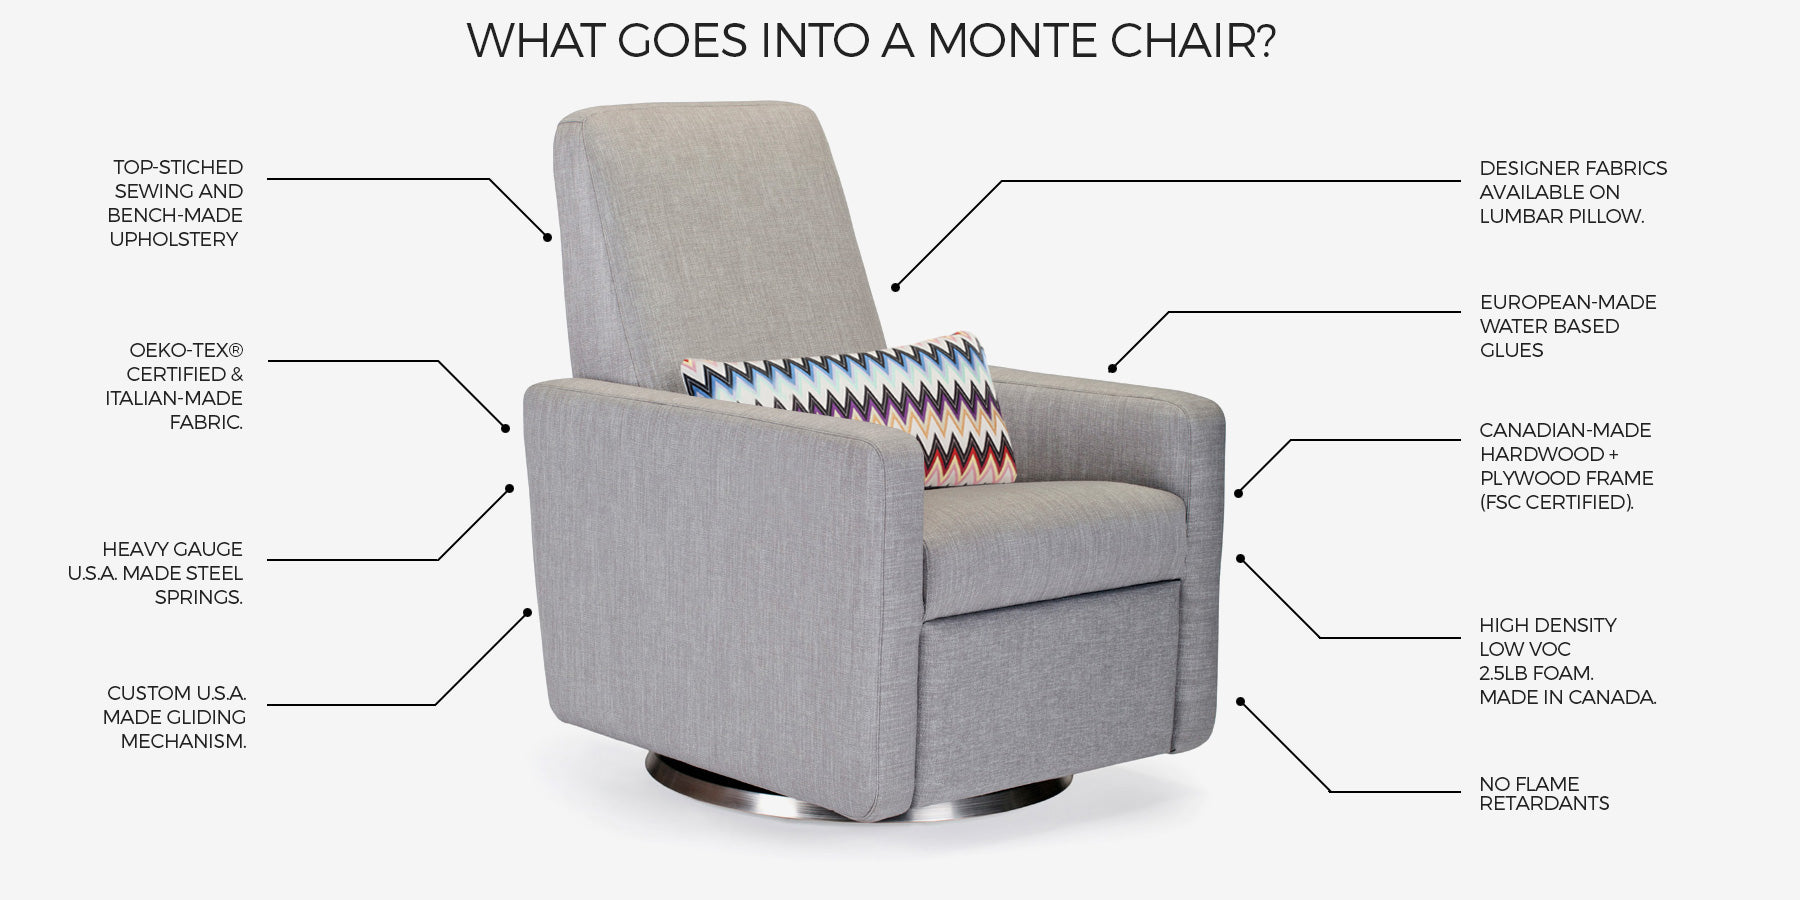 Sustainable Baby Furniture Flame Retardant Free Furniture By Monte